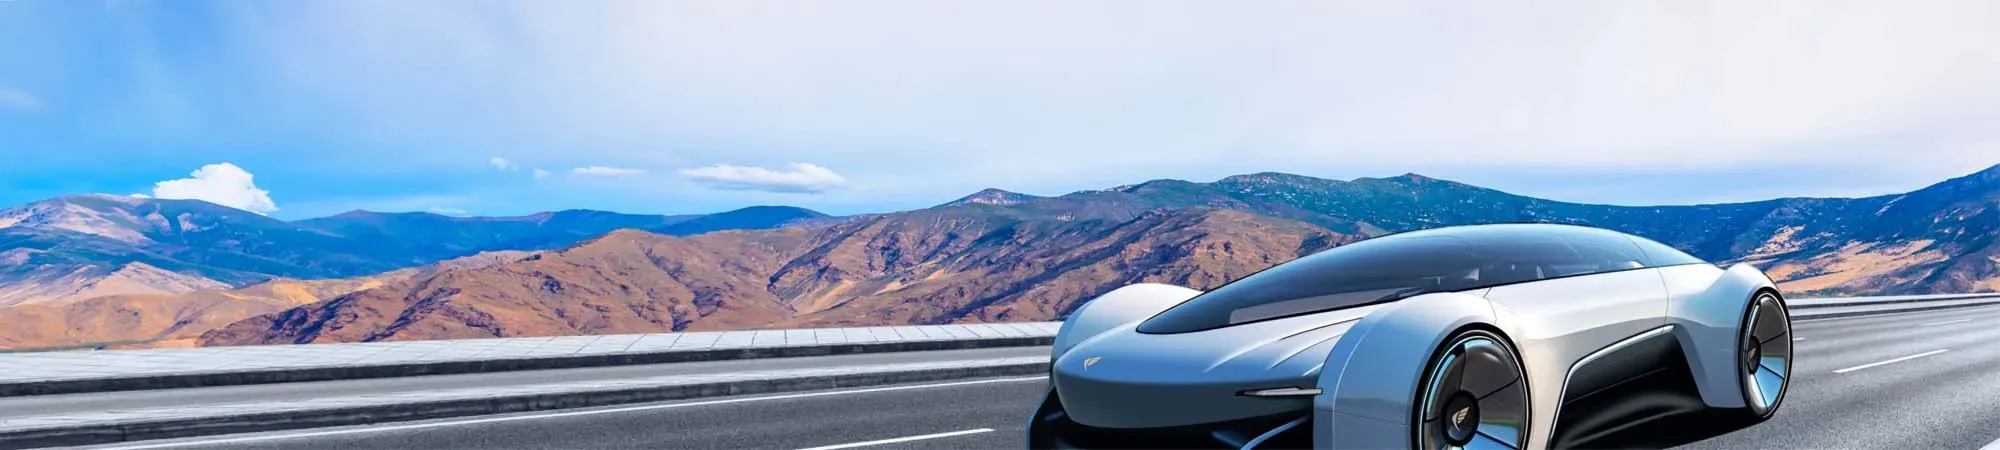 White concept electric car on a road with mountains in the distance